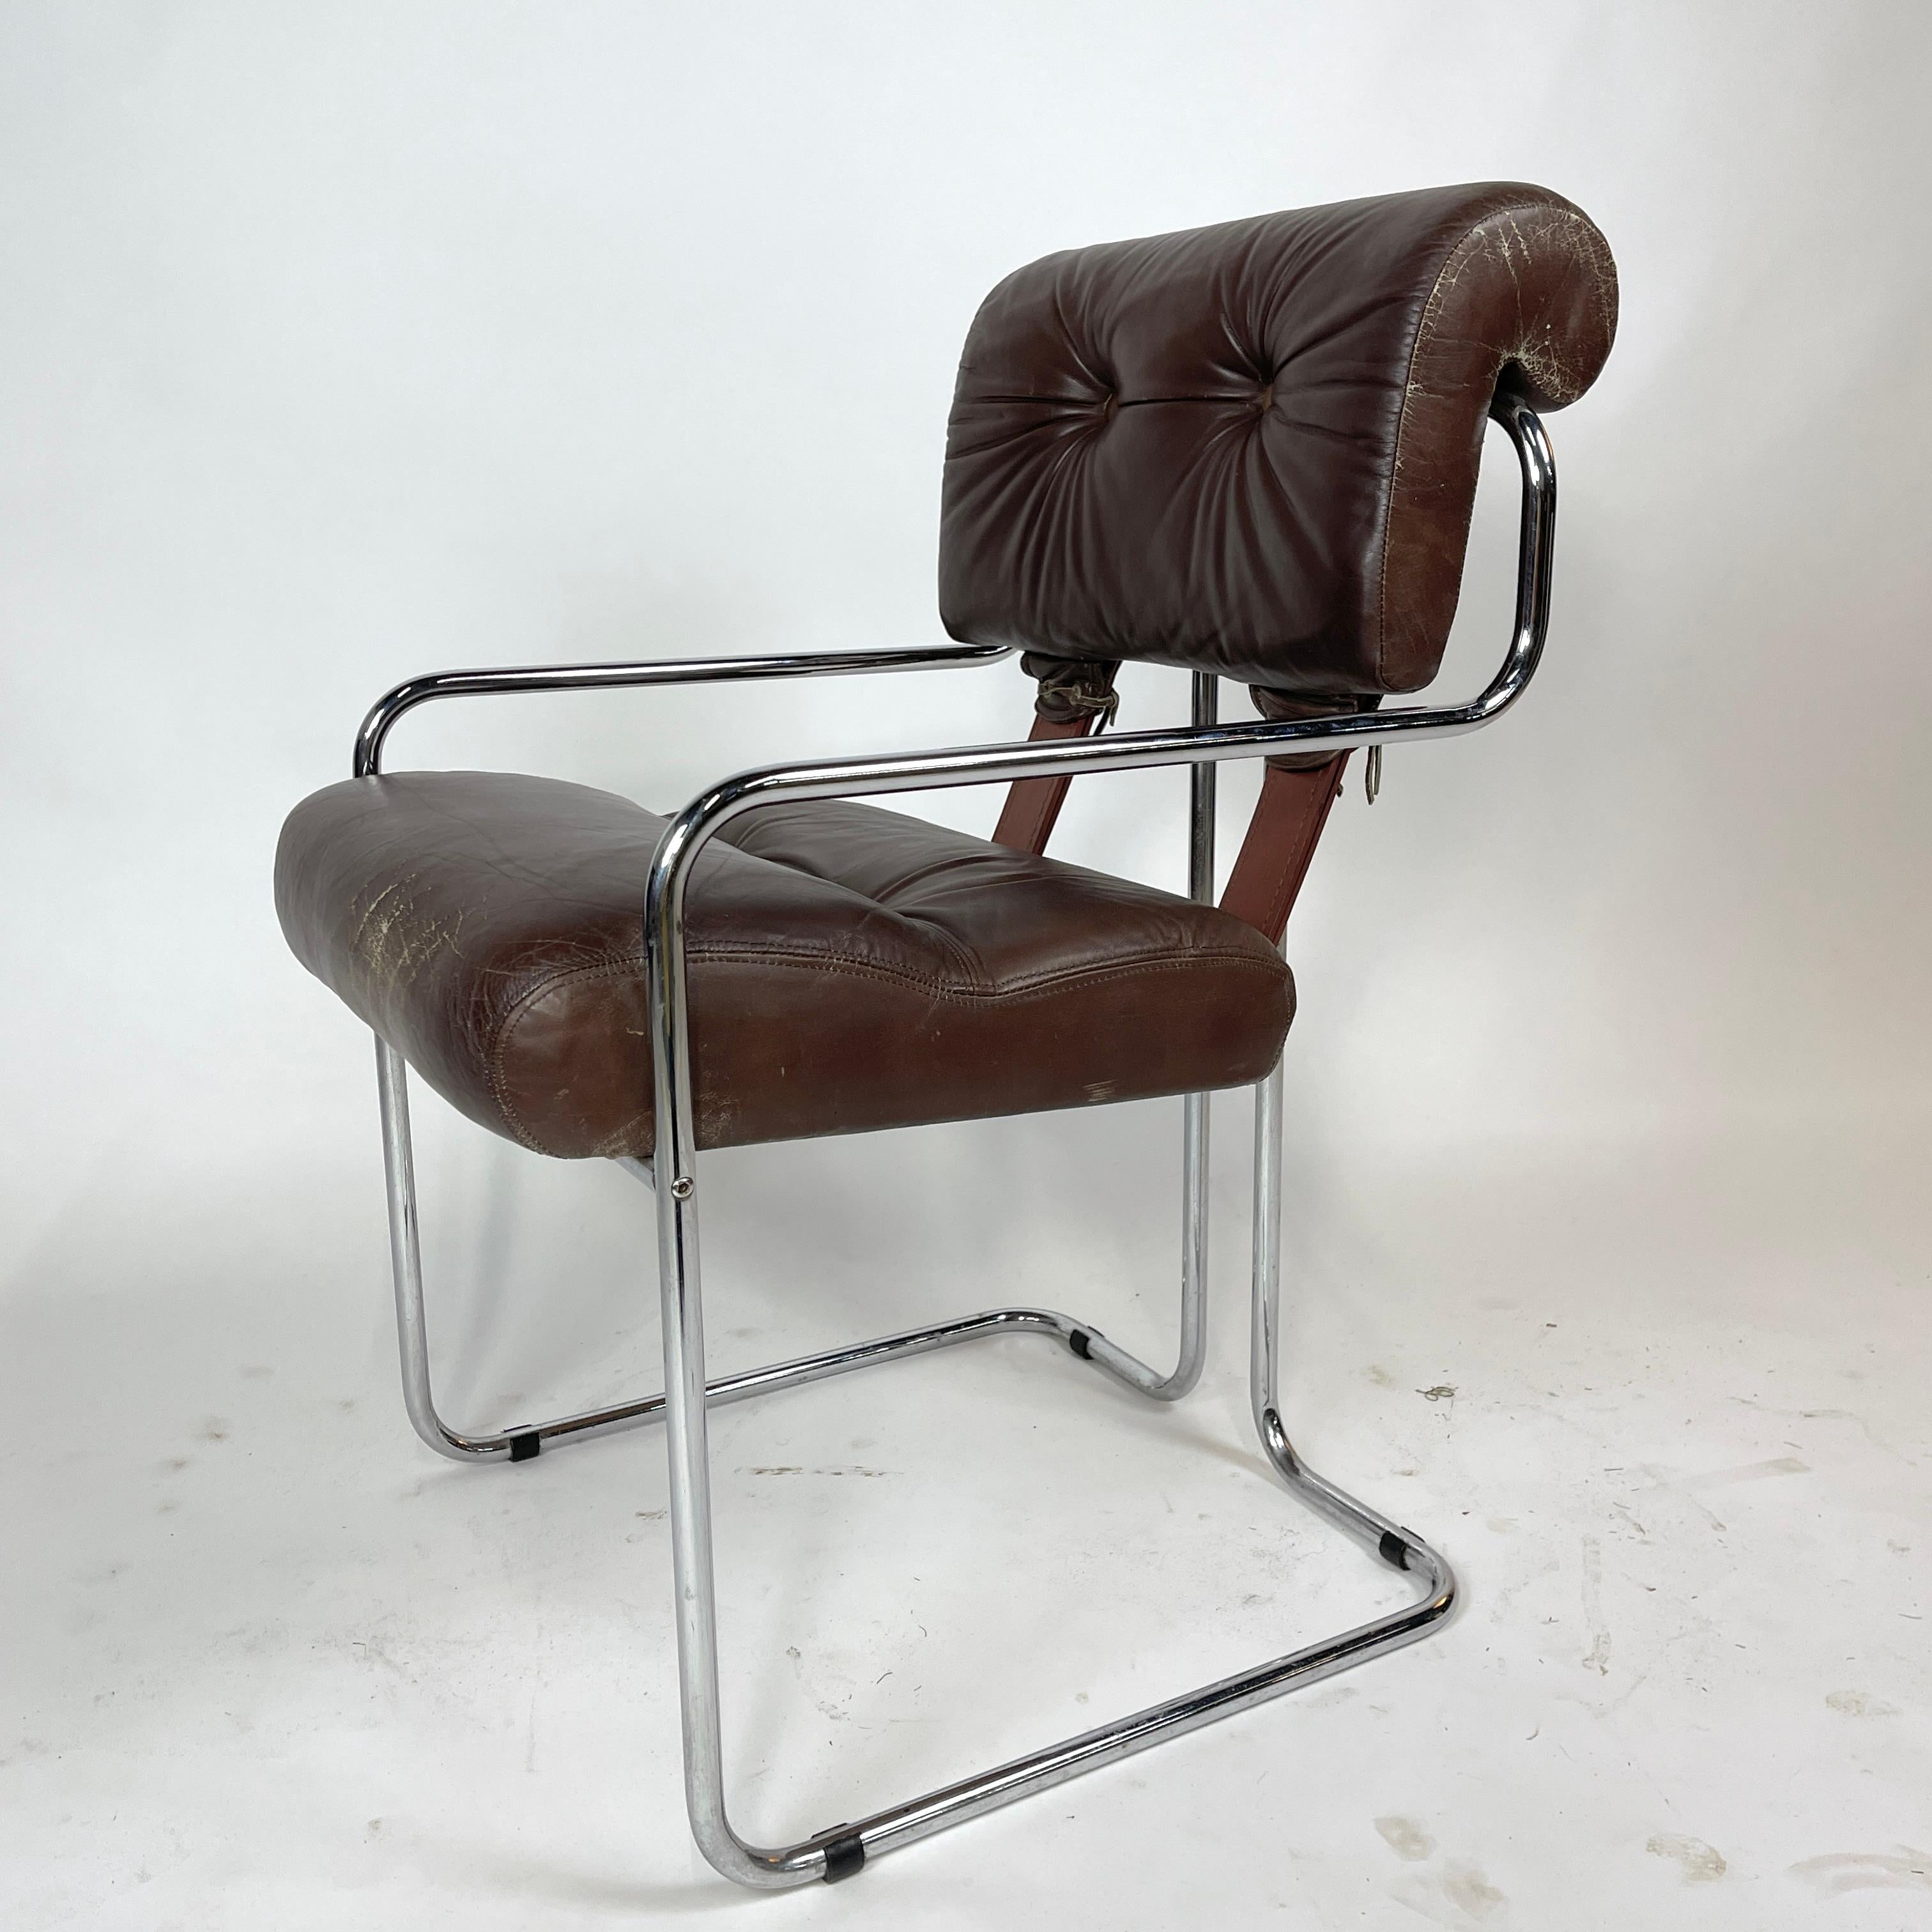 Pace Guido Faleschini 'Tucroma' Sculptural Leather & Chrome Chair Postmodern 2